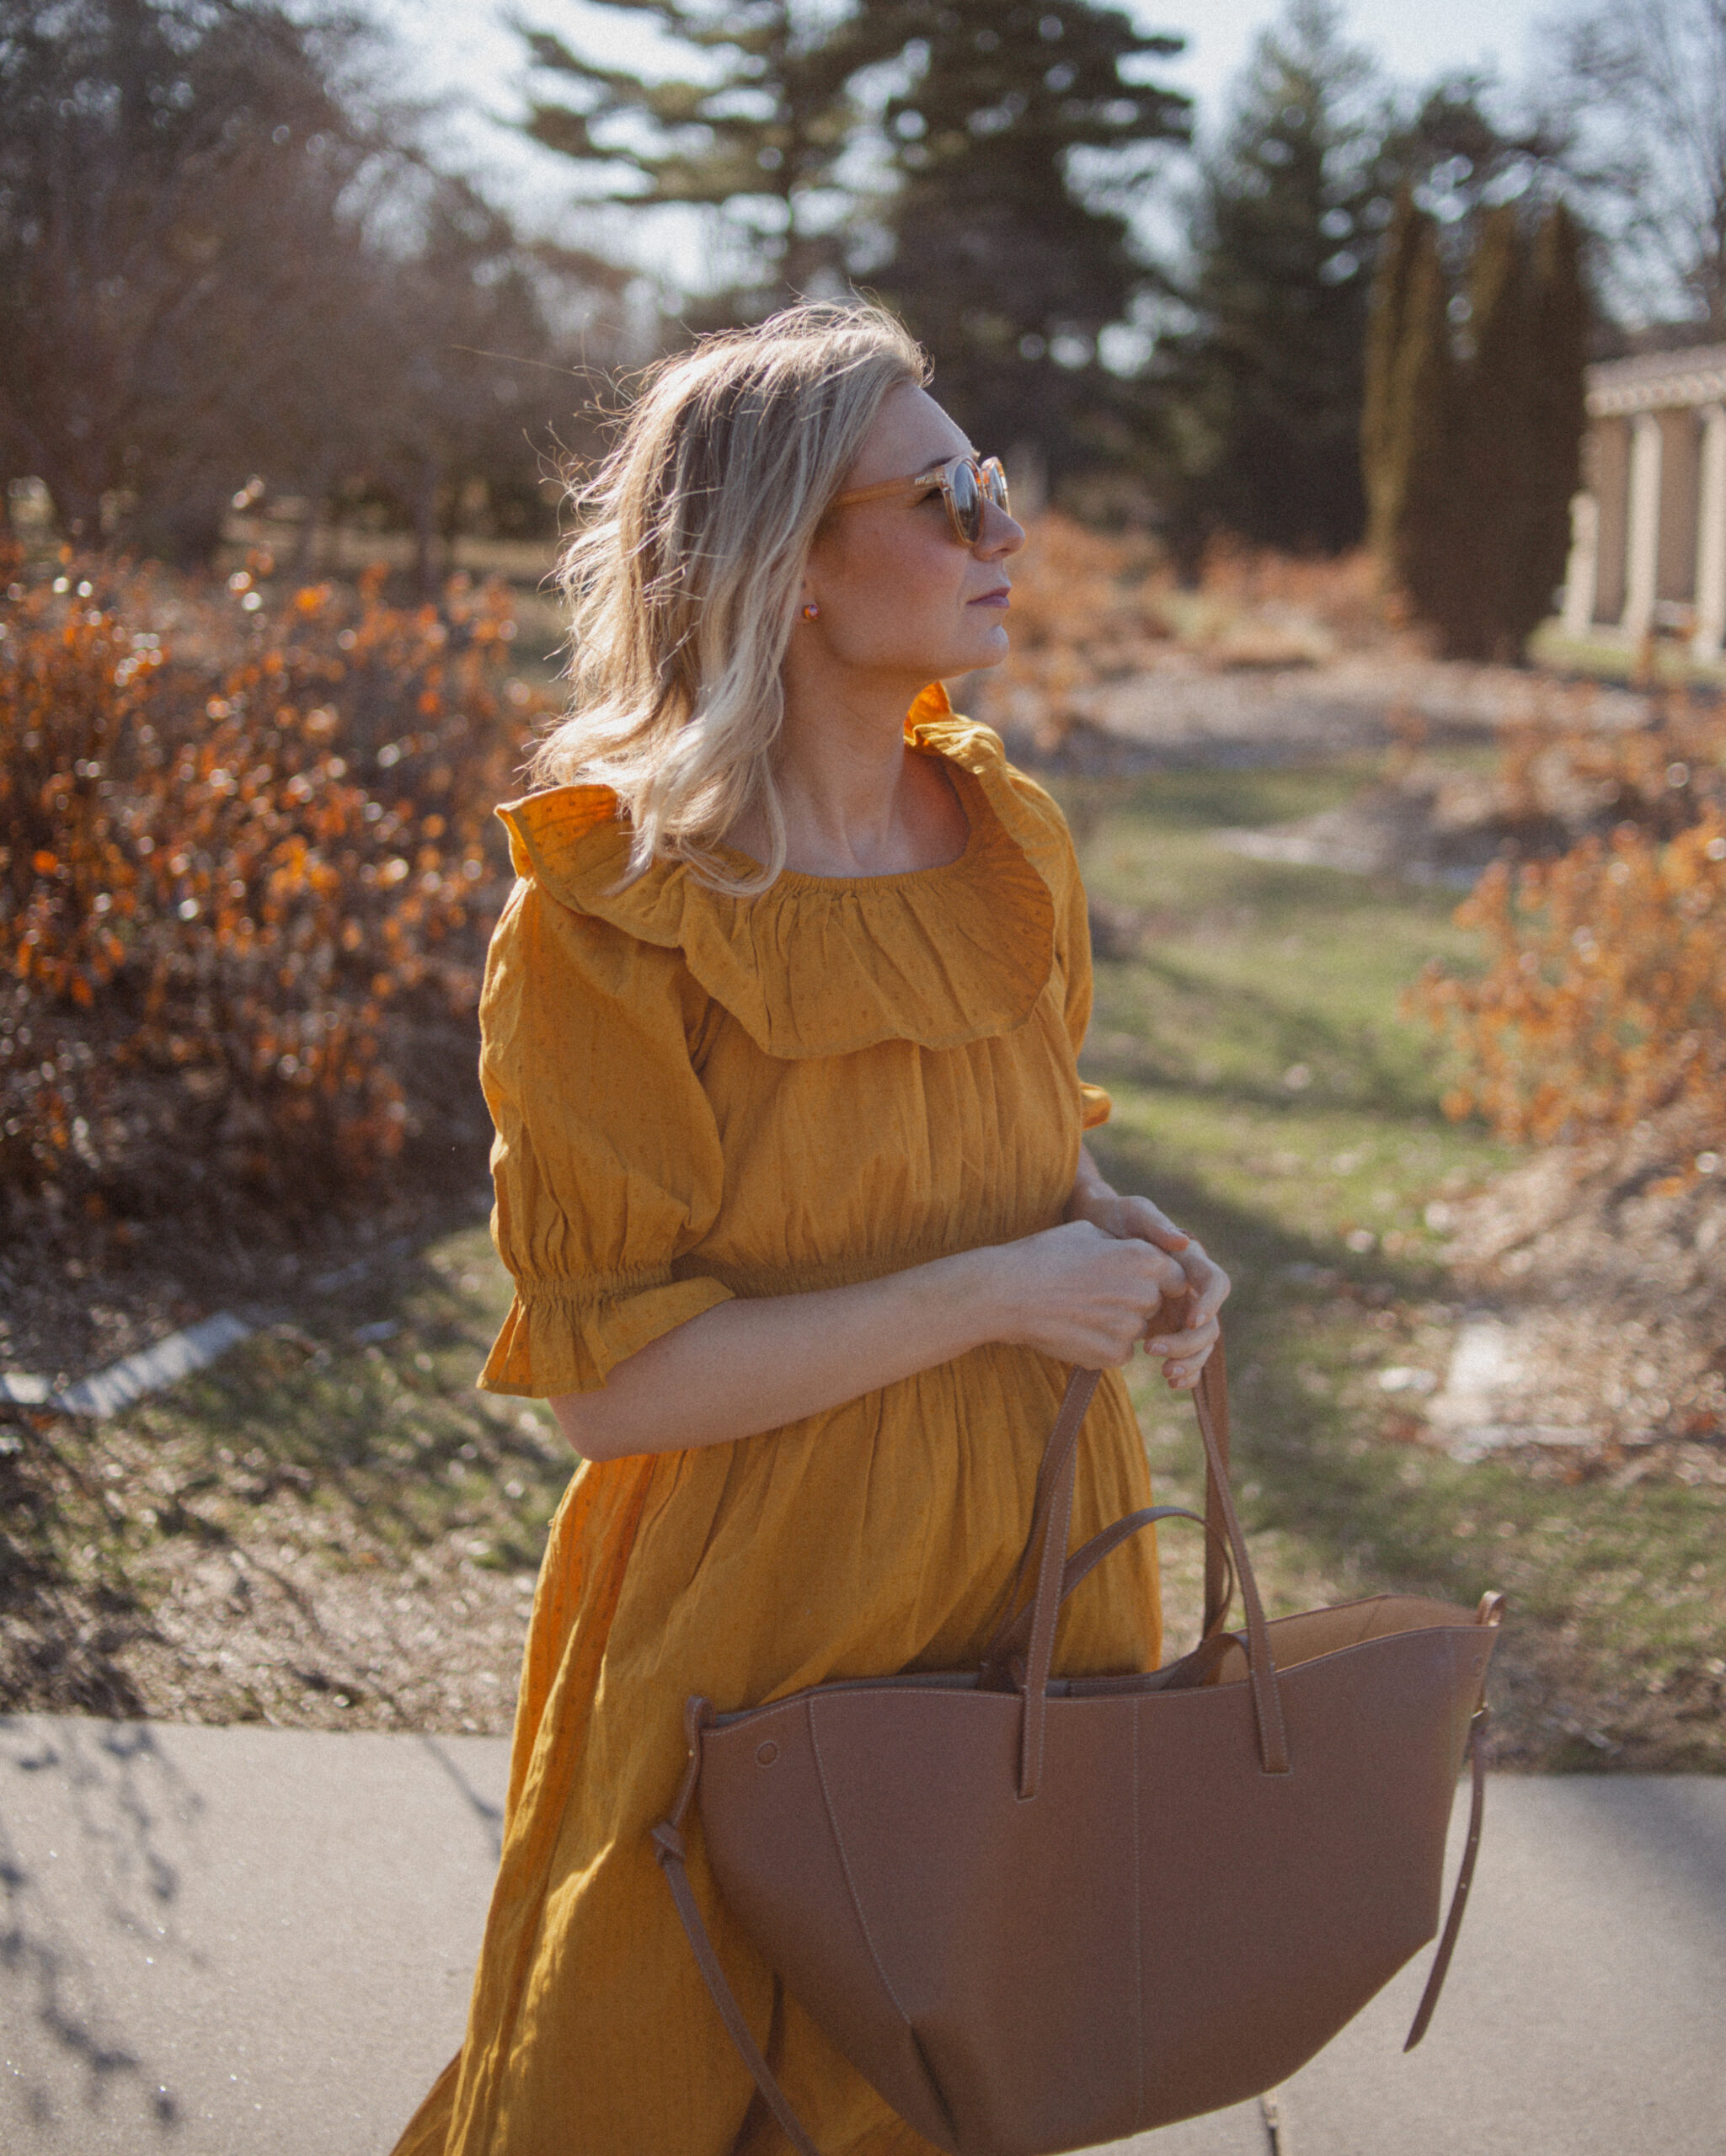 Karin Emily shares her favorites shoes for spring and wears a goldenrod yellow dress with a brown tote bag from Polene